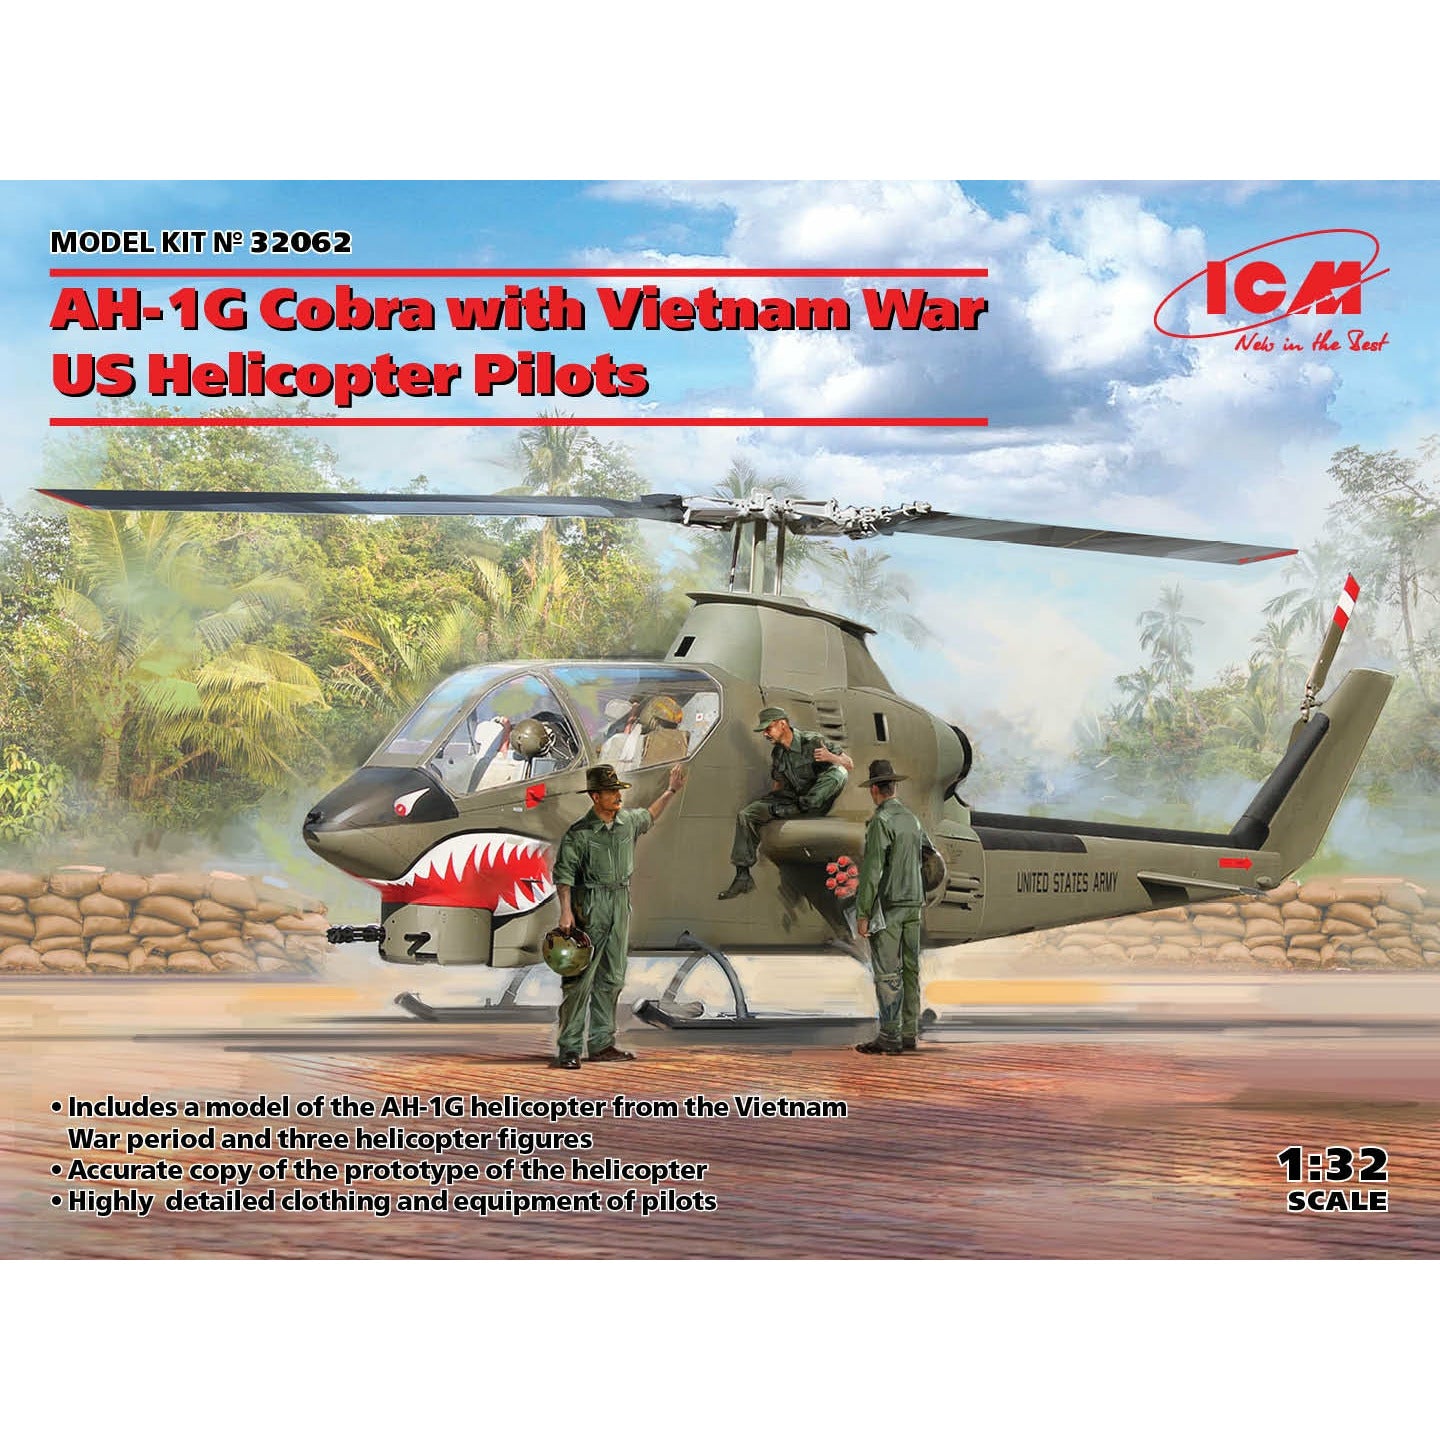 AH-1G Cobra with Vietnam War US Helicopter Pilots 1/32 #32062 by ICM